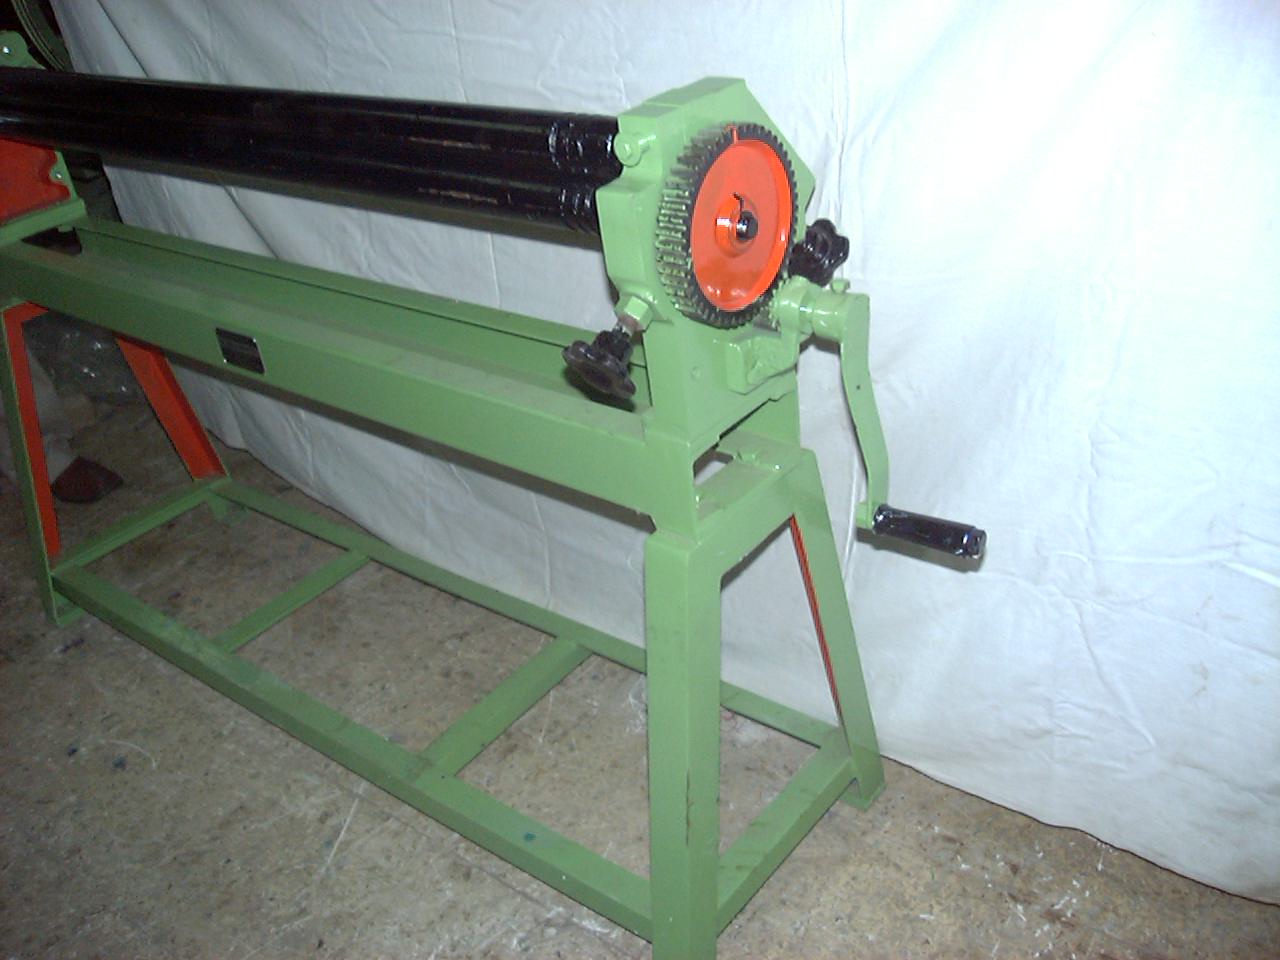 Slipout Type Hand Bending Roller Machine